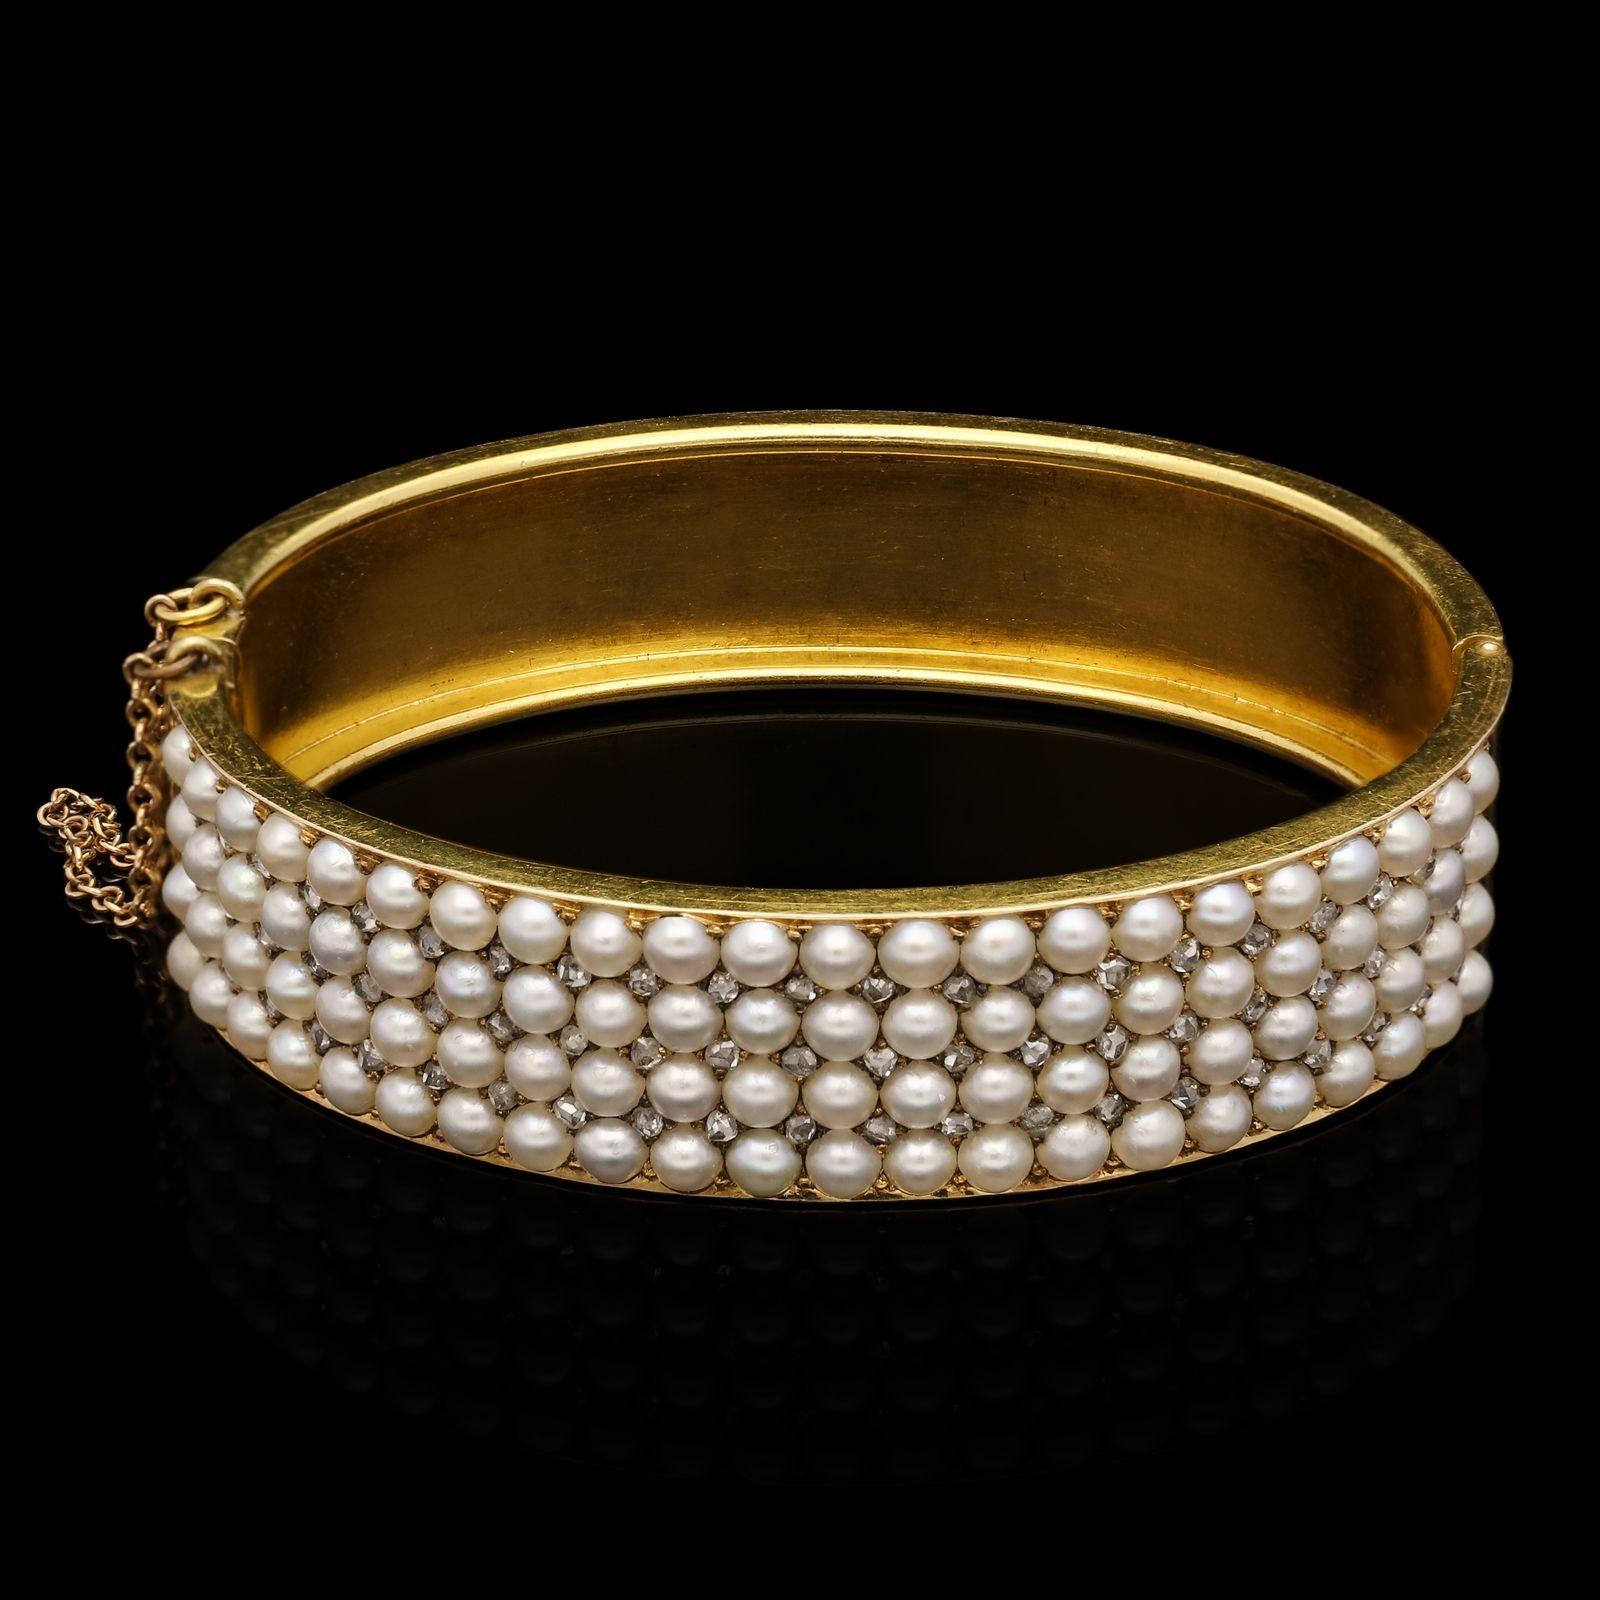 A Victorian gold, pearl and diamond bangle c.1880s, the solid bangle in 15ct yellow gold with hinged side opening, set throughout the front with four straight uniform rows of creamy-white round half-pearls all interspersed with rose diamond points,